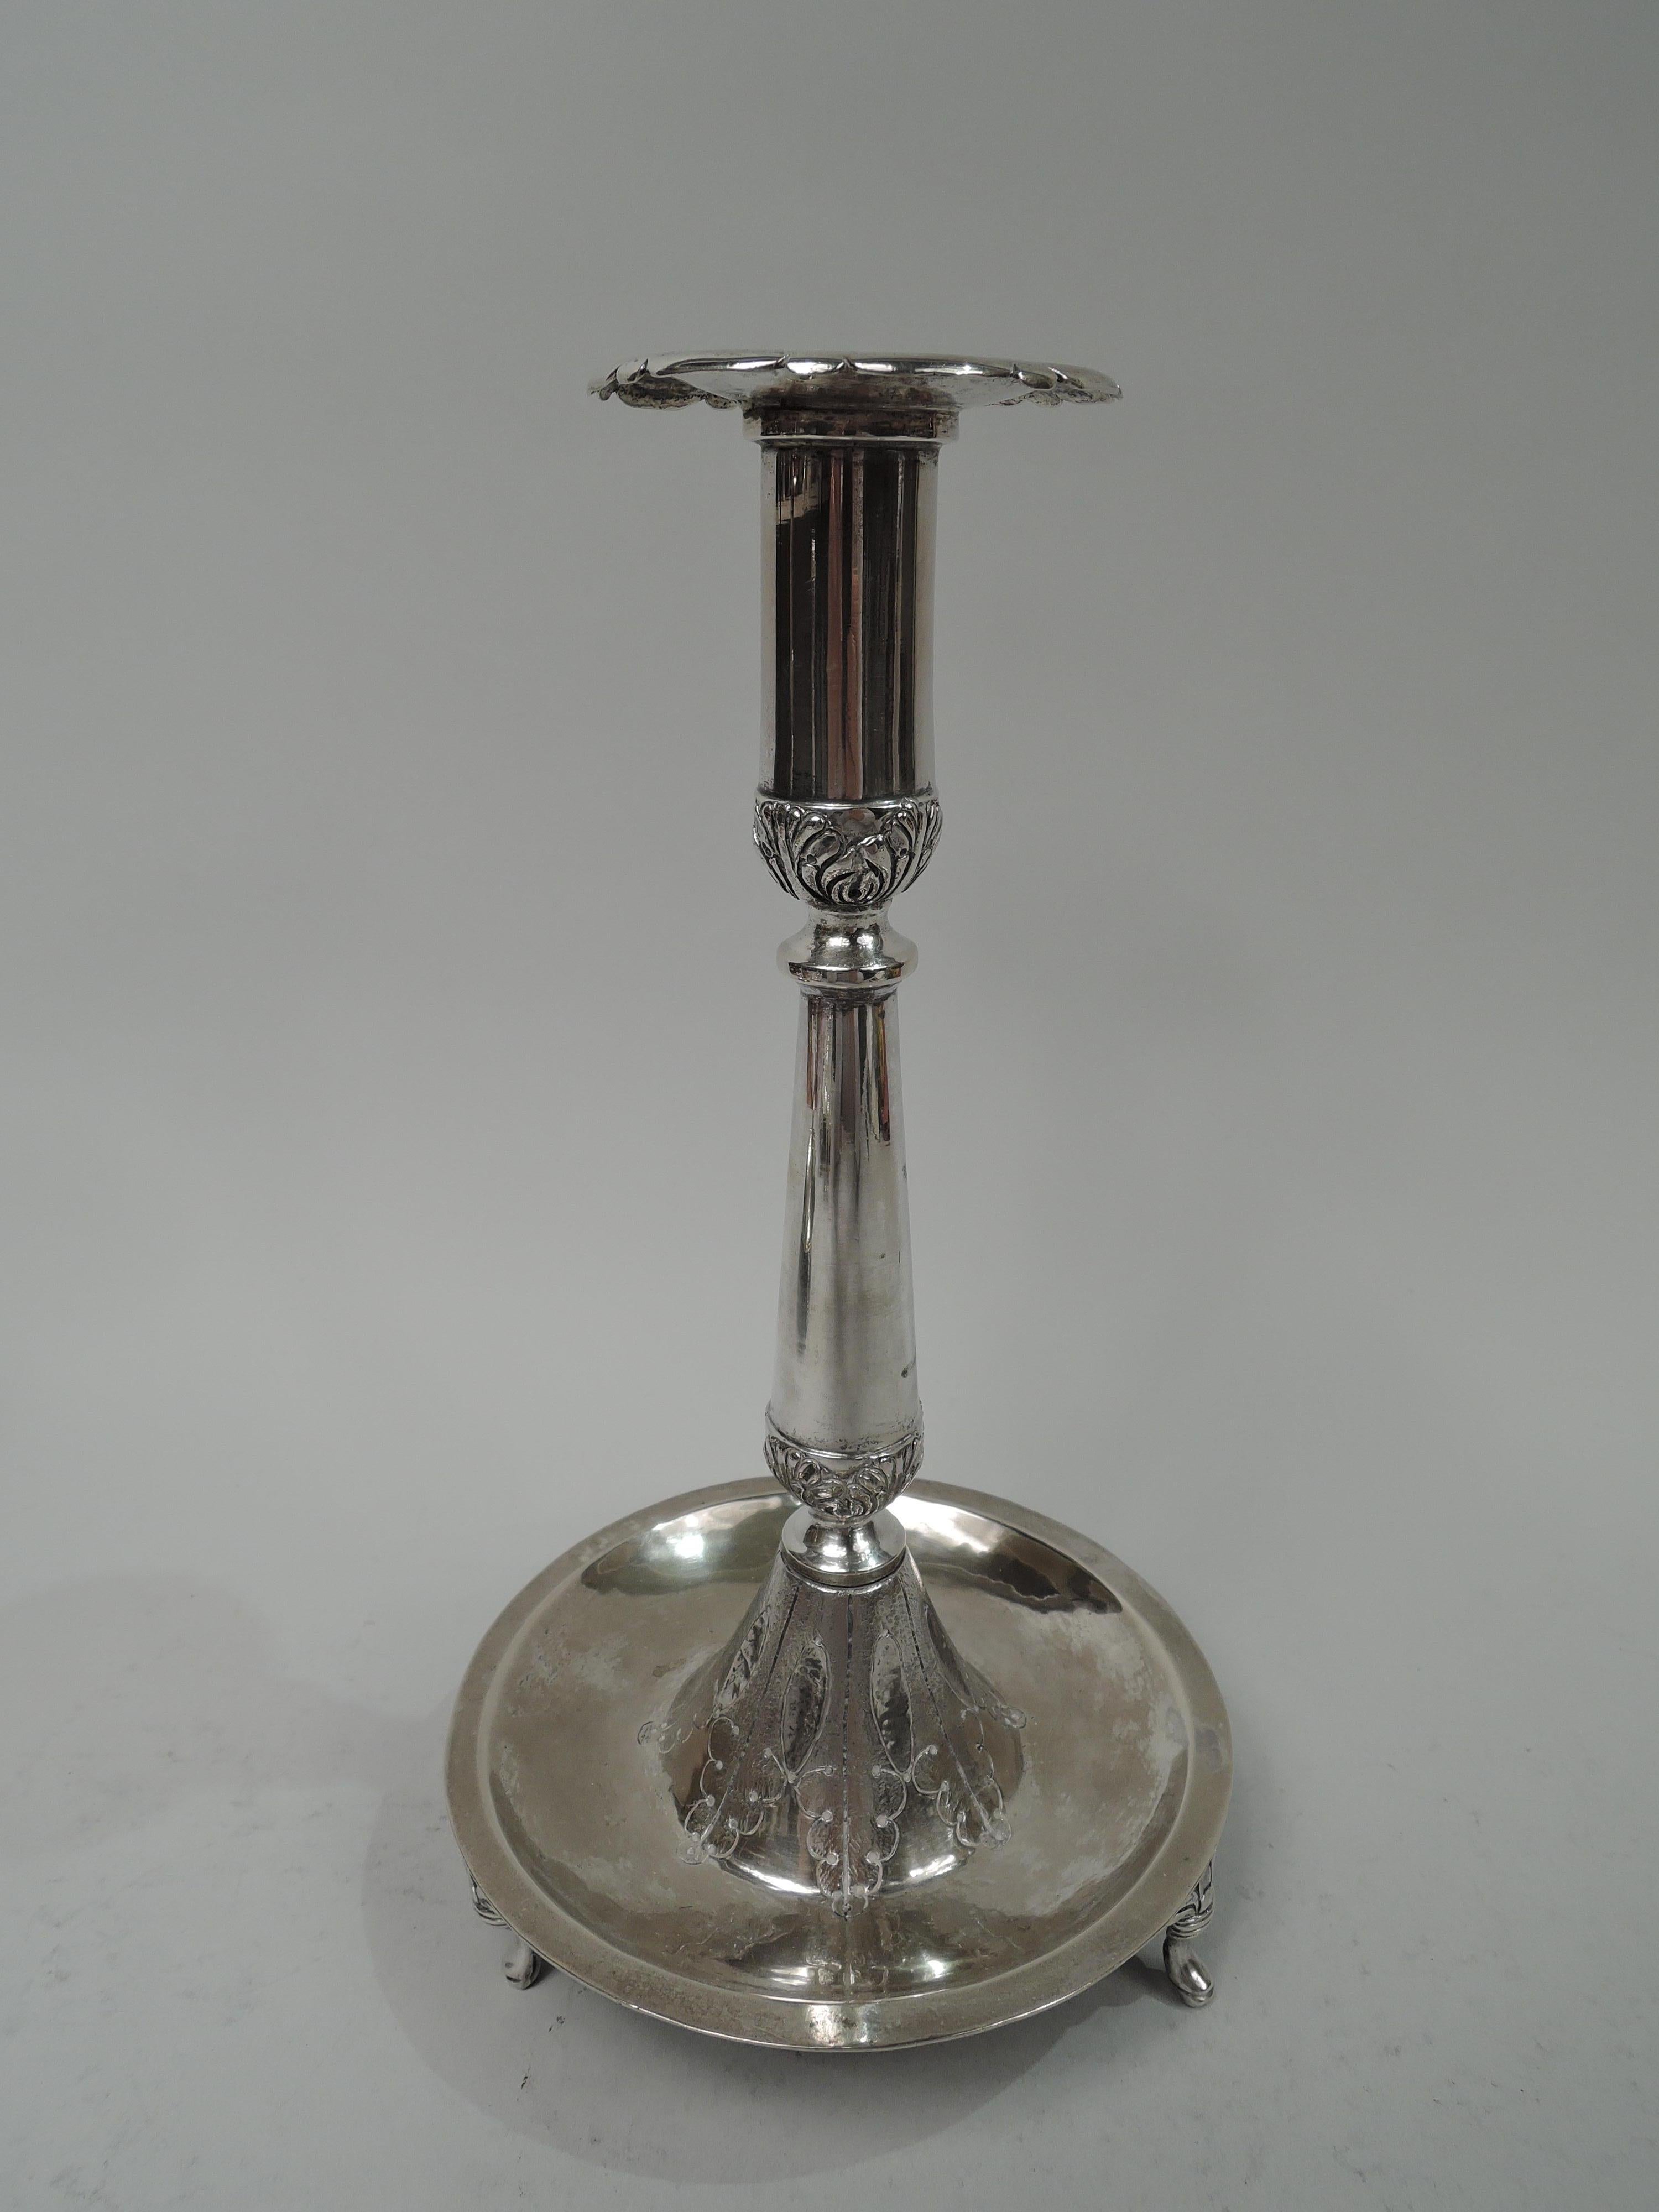 Pair of South American Classical silver candlesticks, 19th century. Each: Tall and upward tapering socket with scalloped bobeche on baluster shaft; domed foot set in round and concave base. Three leaf-mounted scroll supports. Tooled leaf borders at